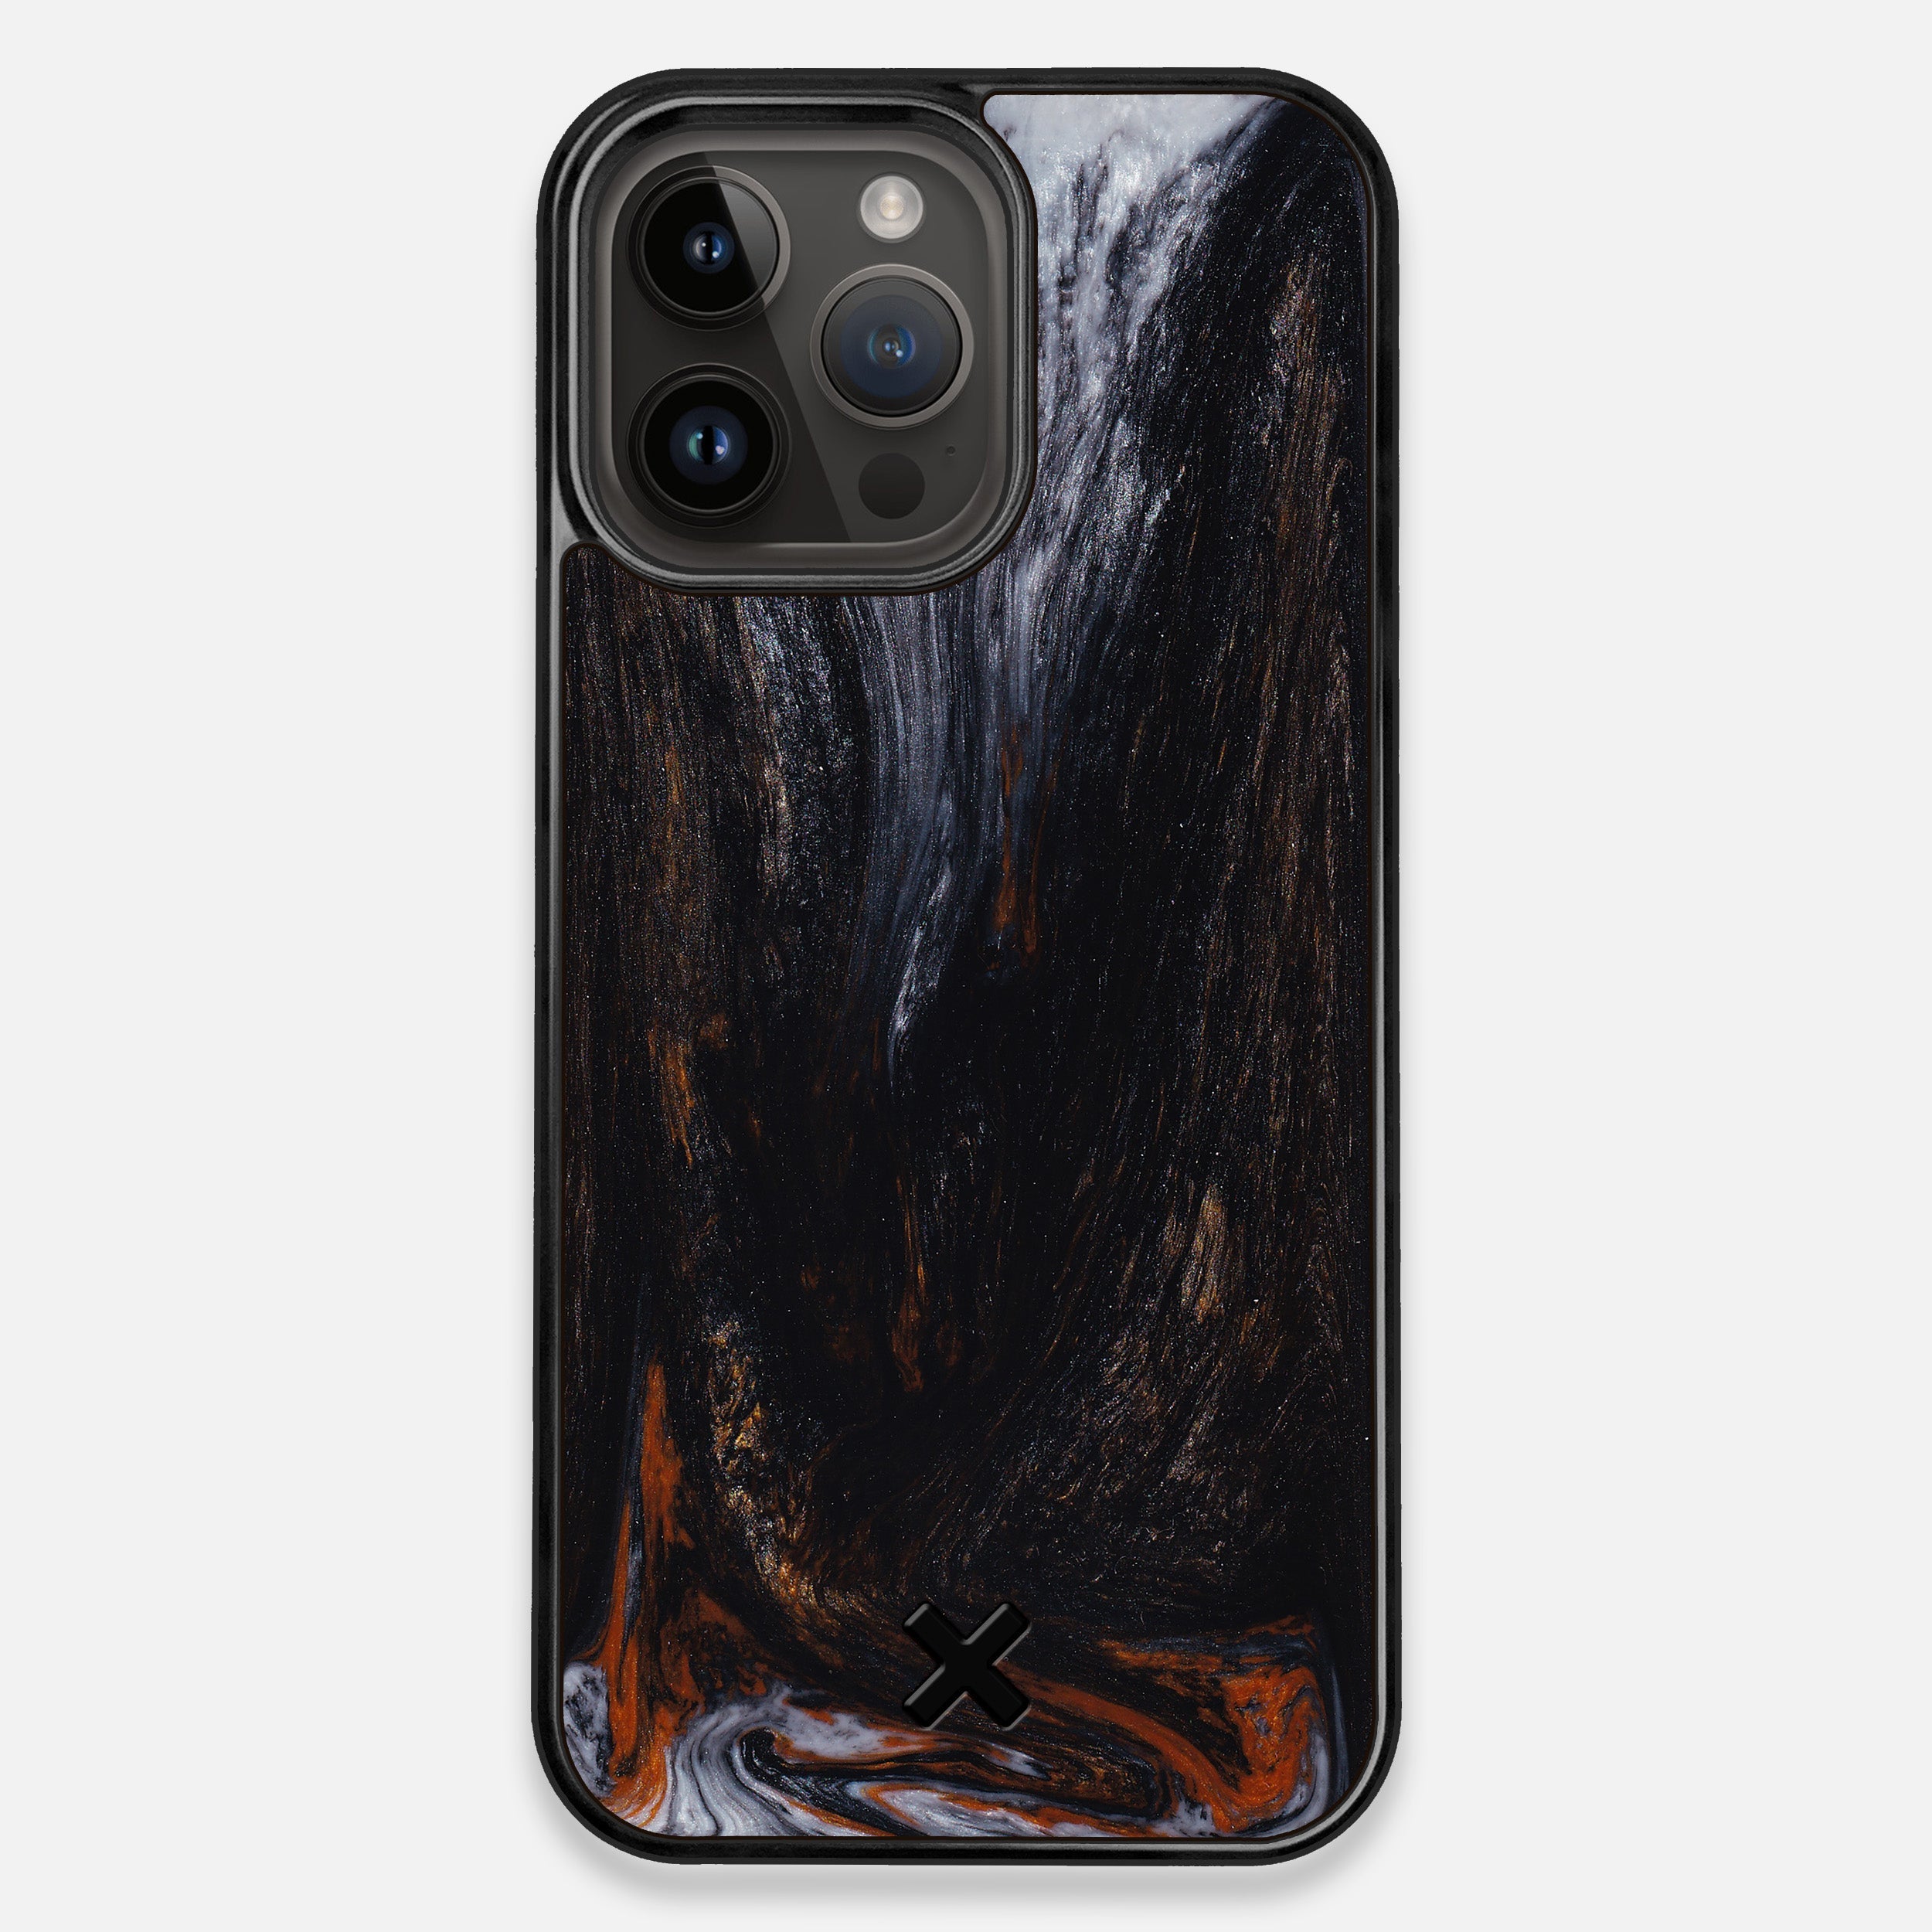 One & Only - Wood and Resin Case - #01740